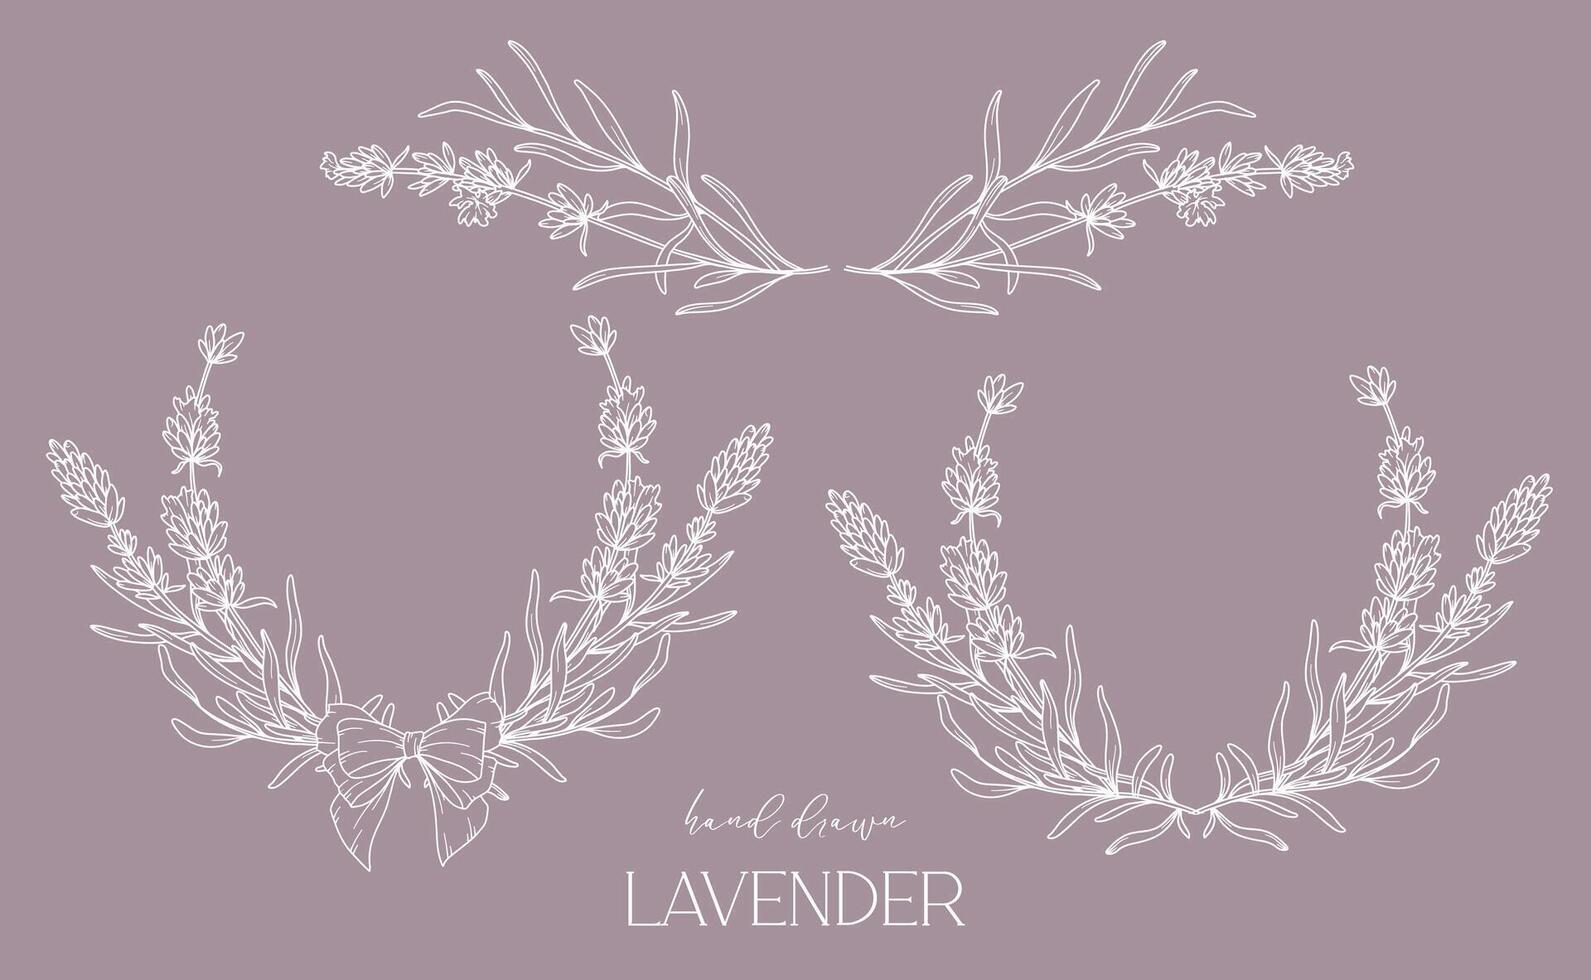 Lavender Line Drawing. Black and white Floral Frames. Floral Line Art. Fine Line Lavender illustration. Hand Drawn Outline flowers. Botanical Coloring Page. Wedding invitation flowers vector